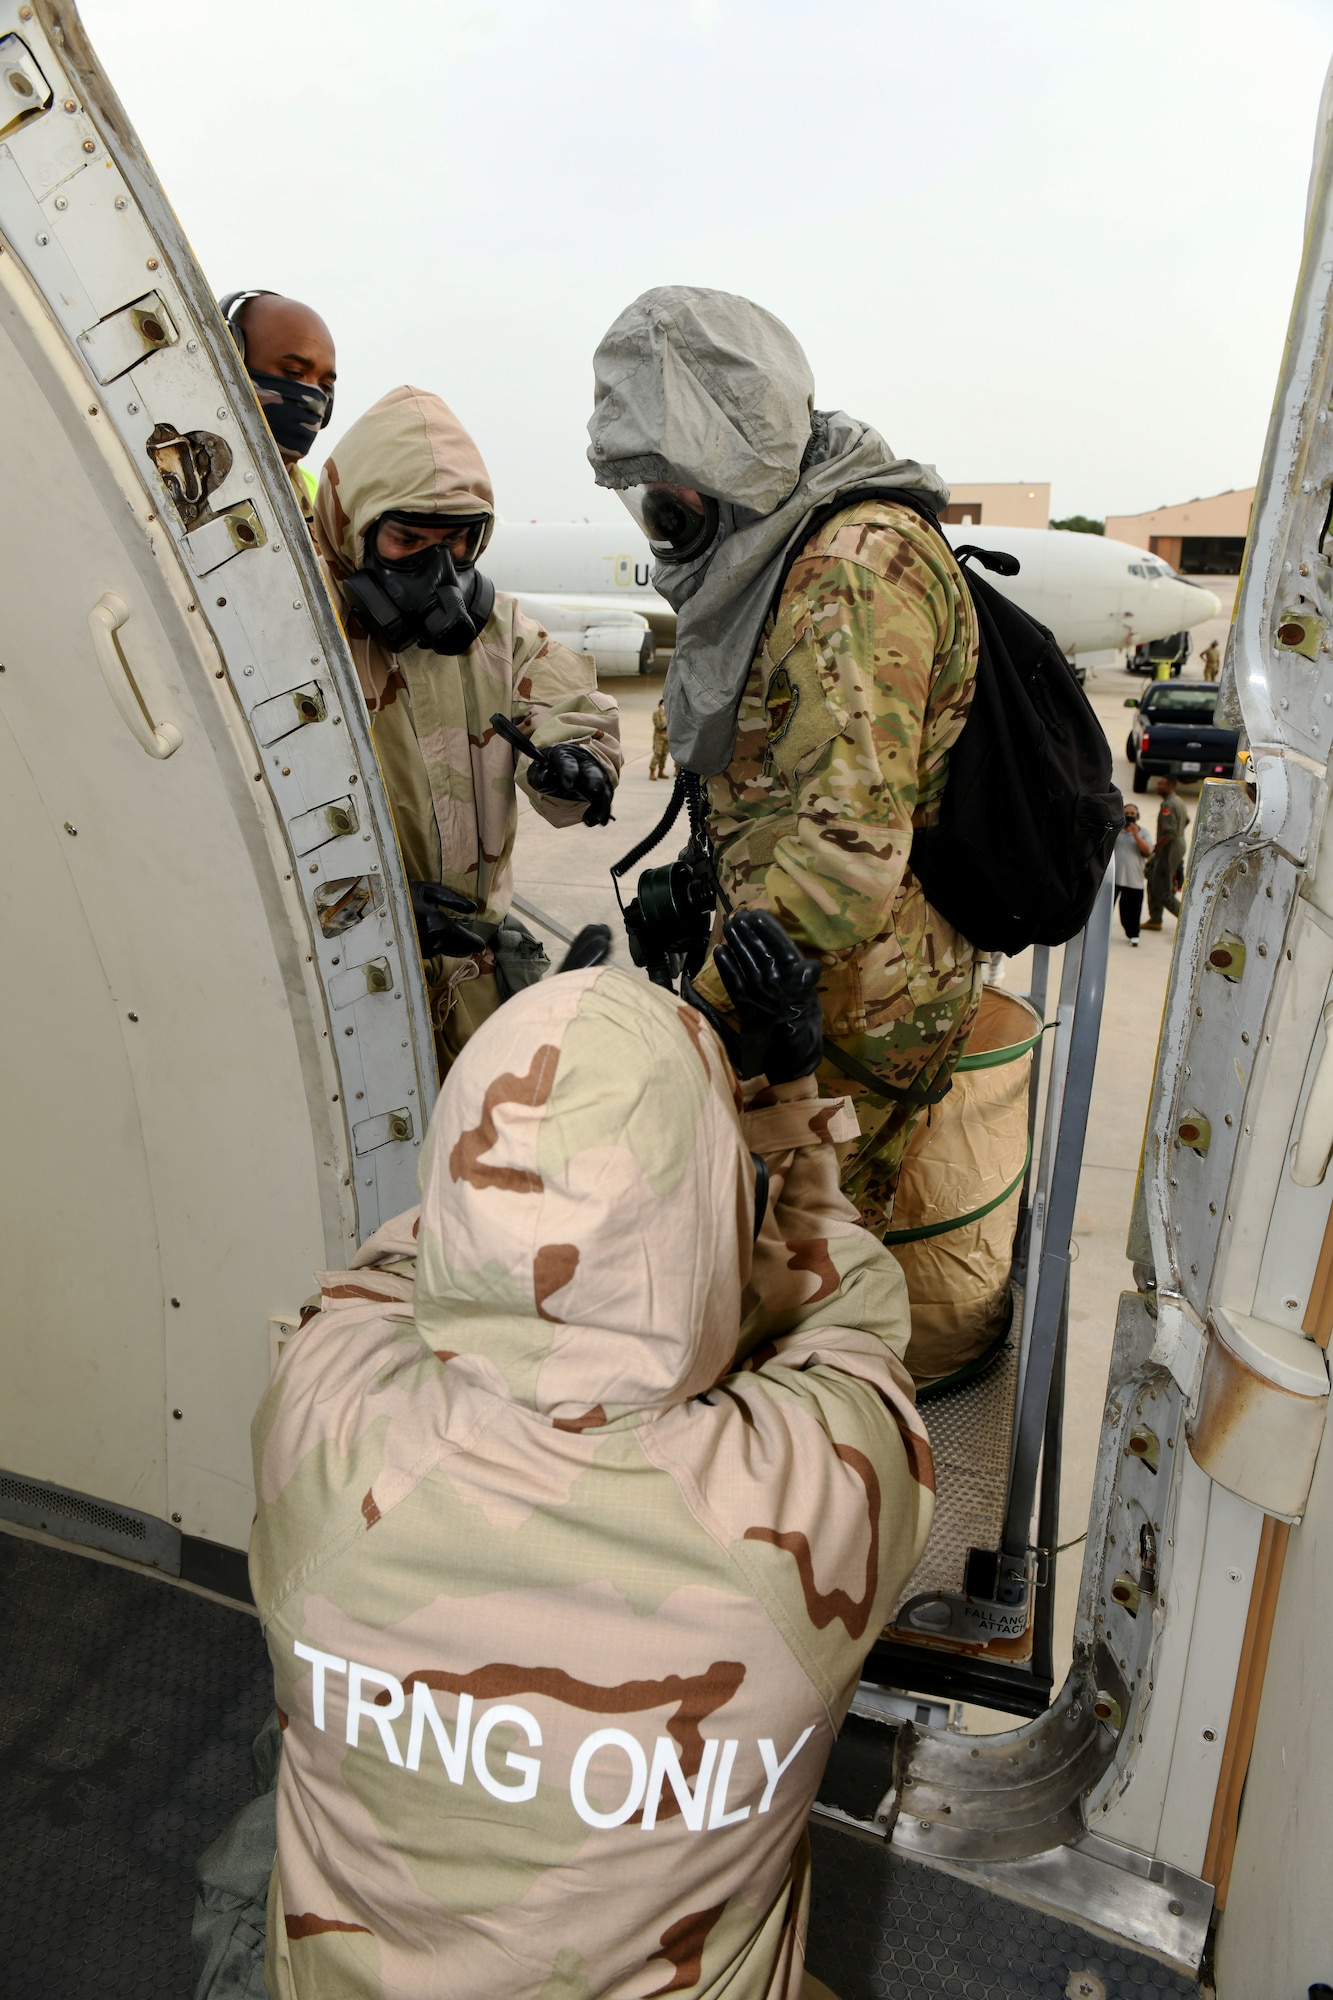 Photo shows Airmen helping someone in CBRNE gear maneuver onto an aircraft.